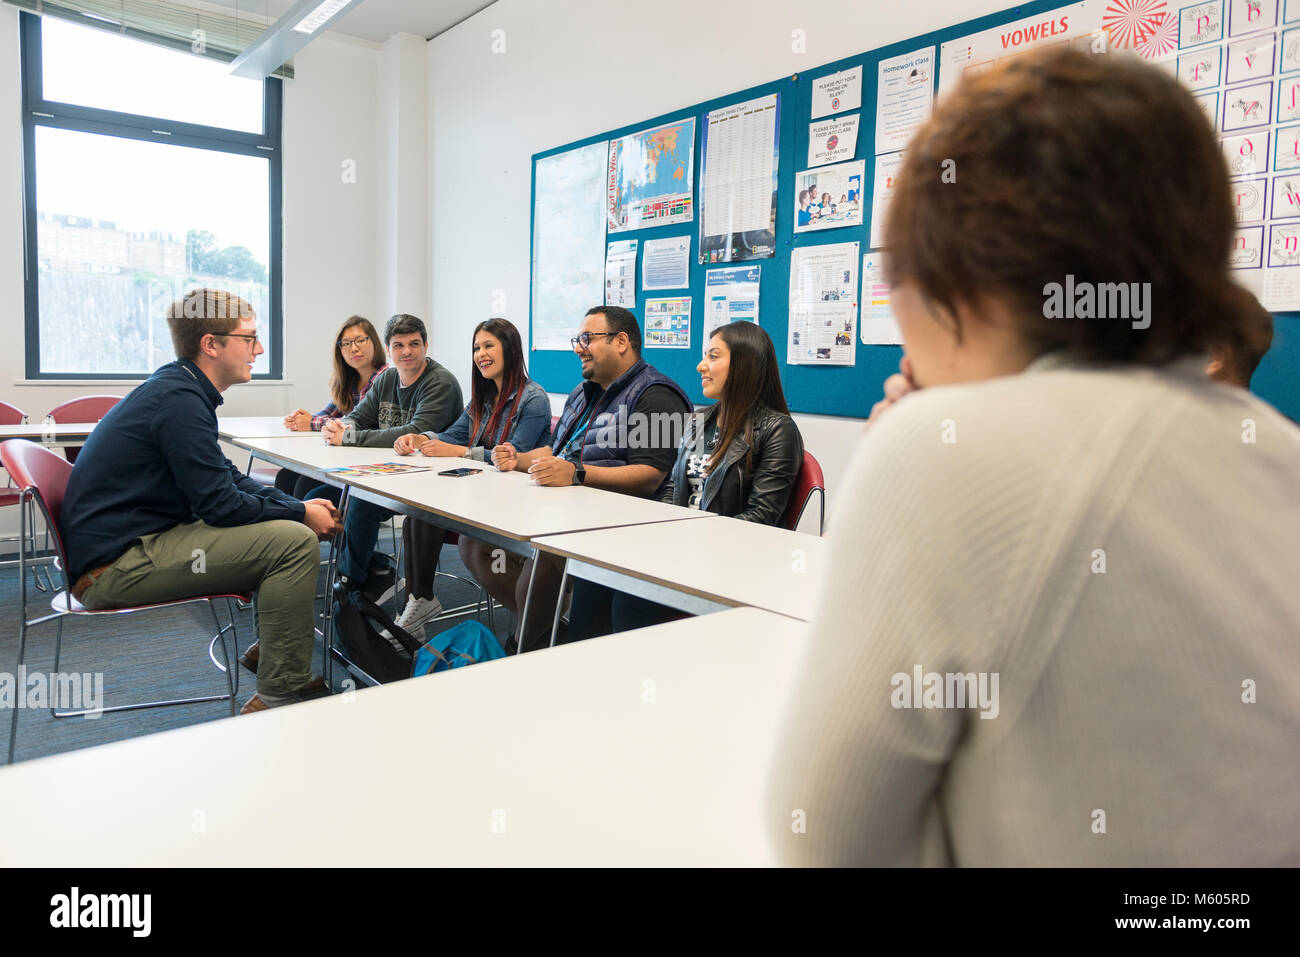 real overseas students learn english at college in the classroom and library of a college / university Stock Photo